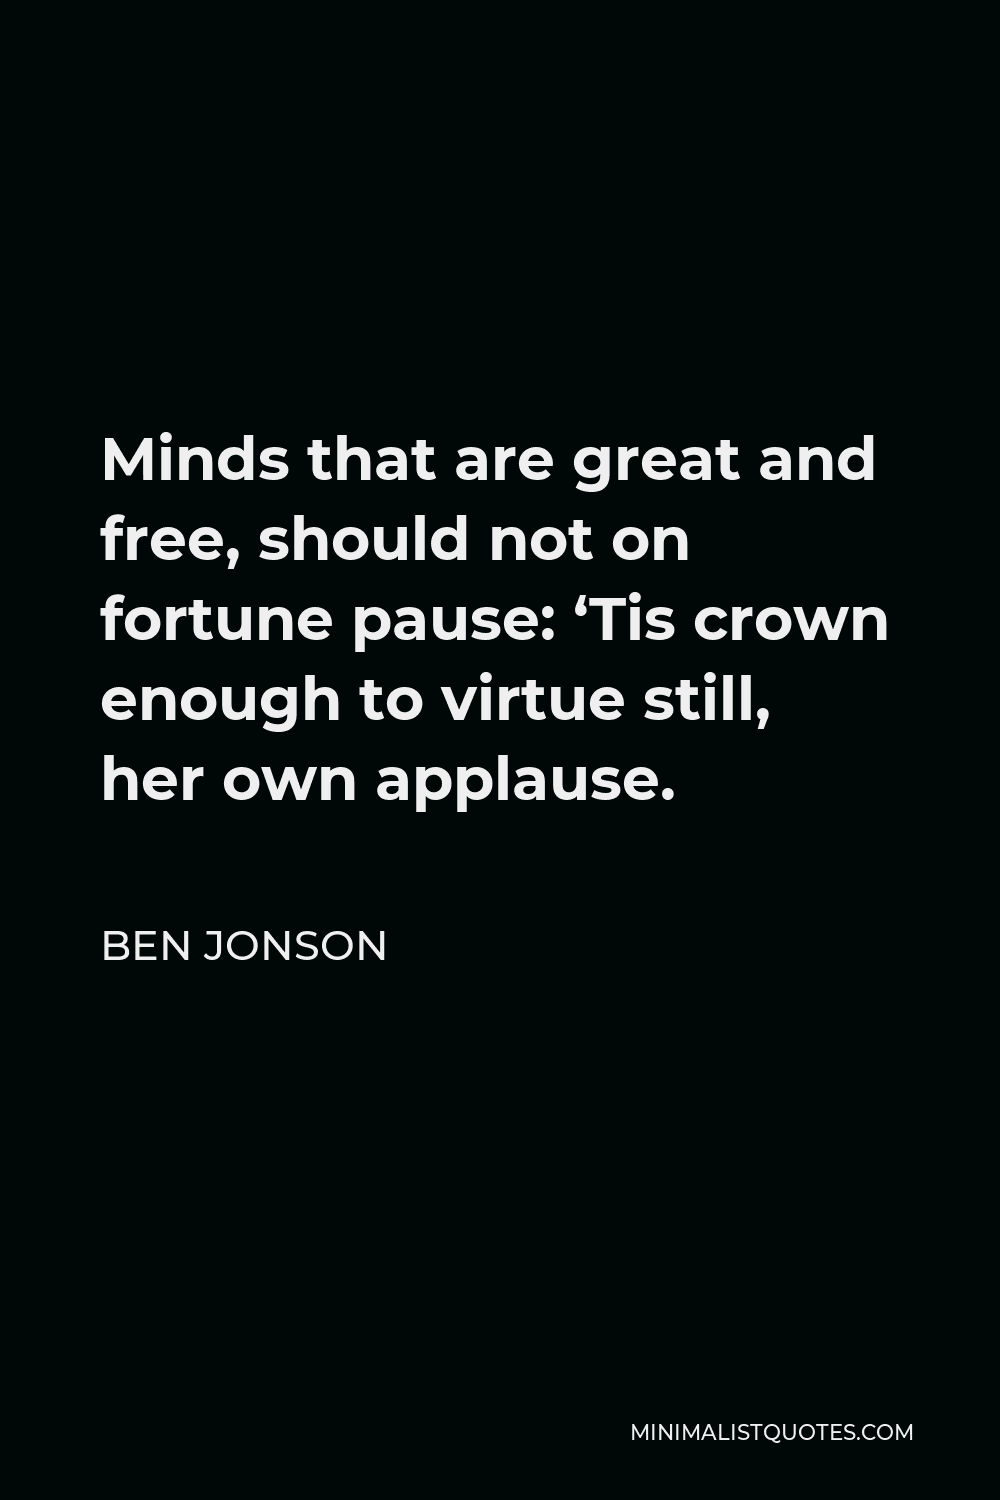 Ben Jonson Quote - Minds that are great and free, should not on fortune pause: ‘Tis crown enough to virtue still, her own applause.